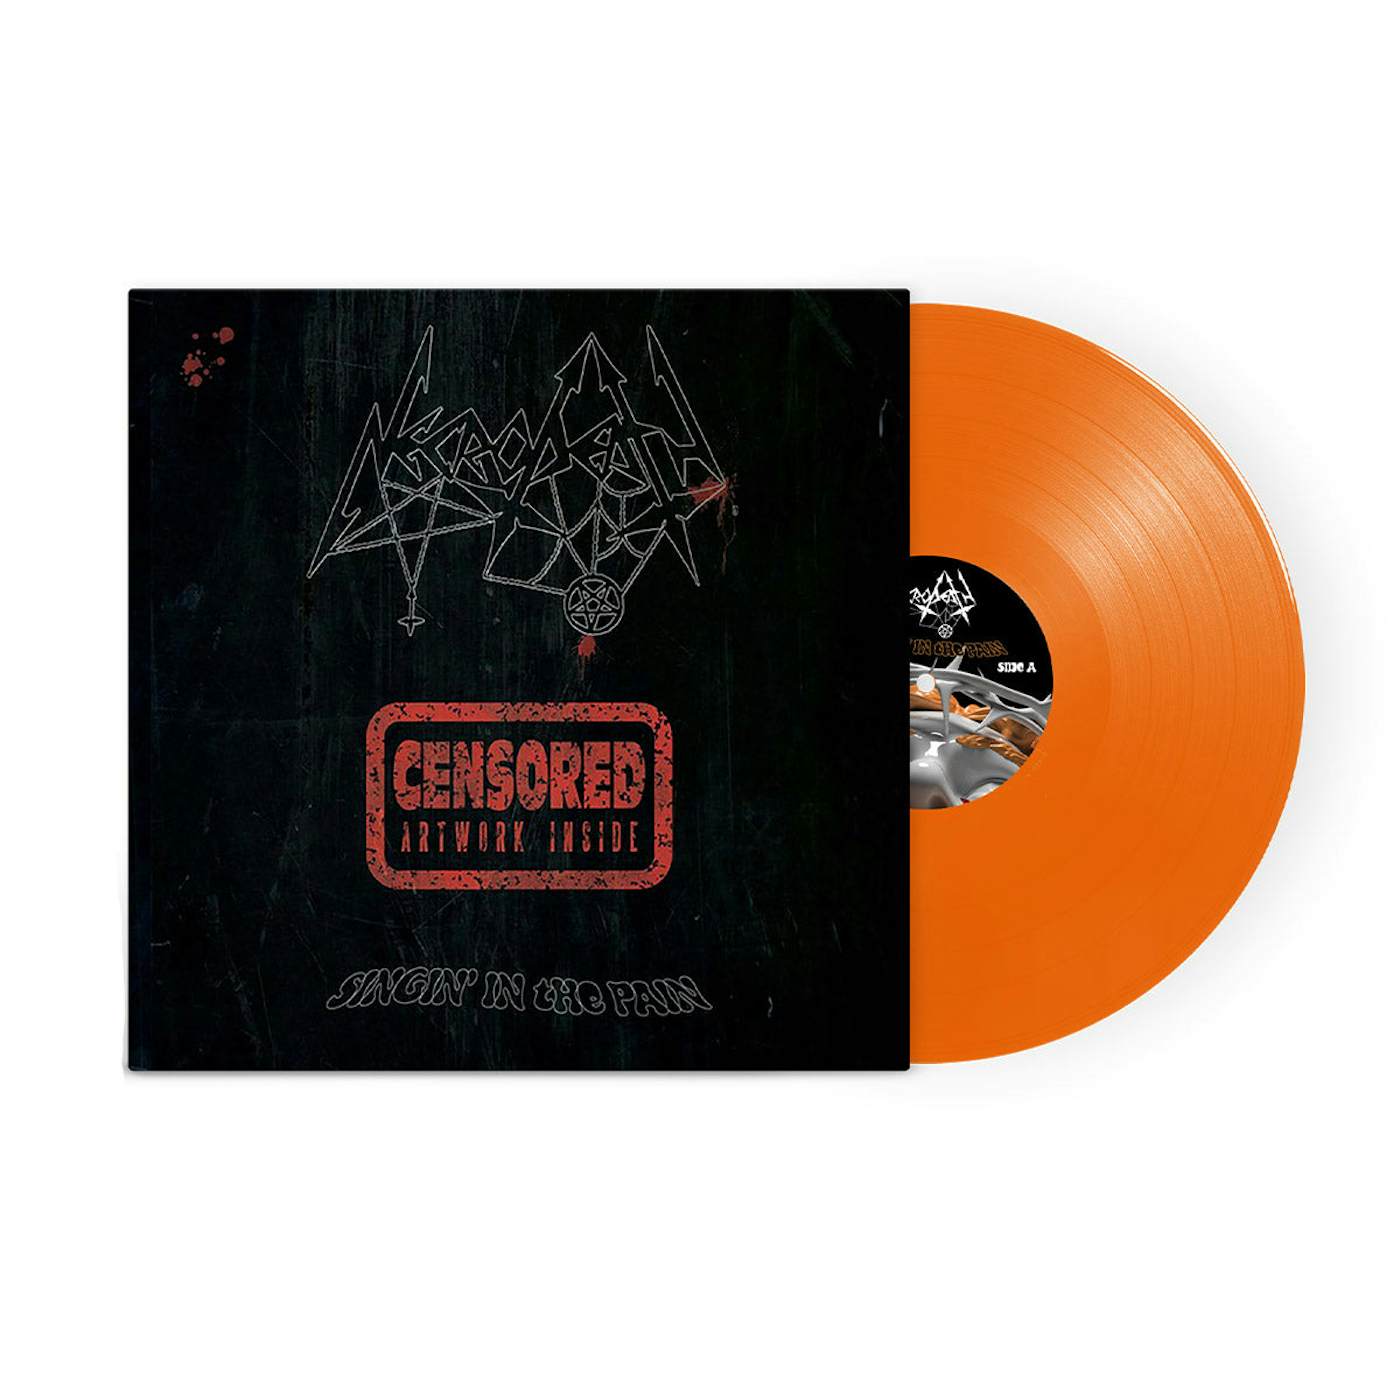 Necrodeath "Singin' In The Pain" Limited Edition 12"